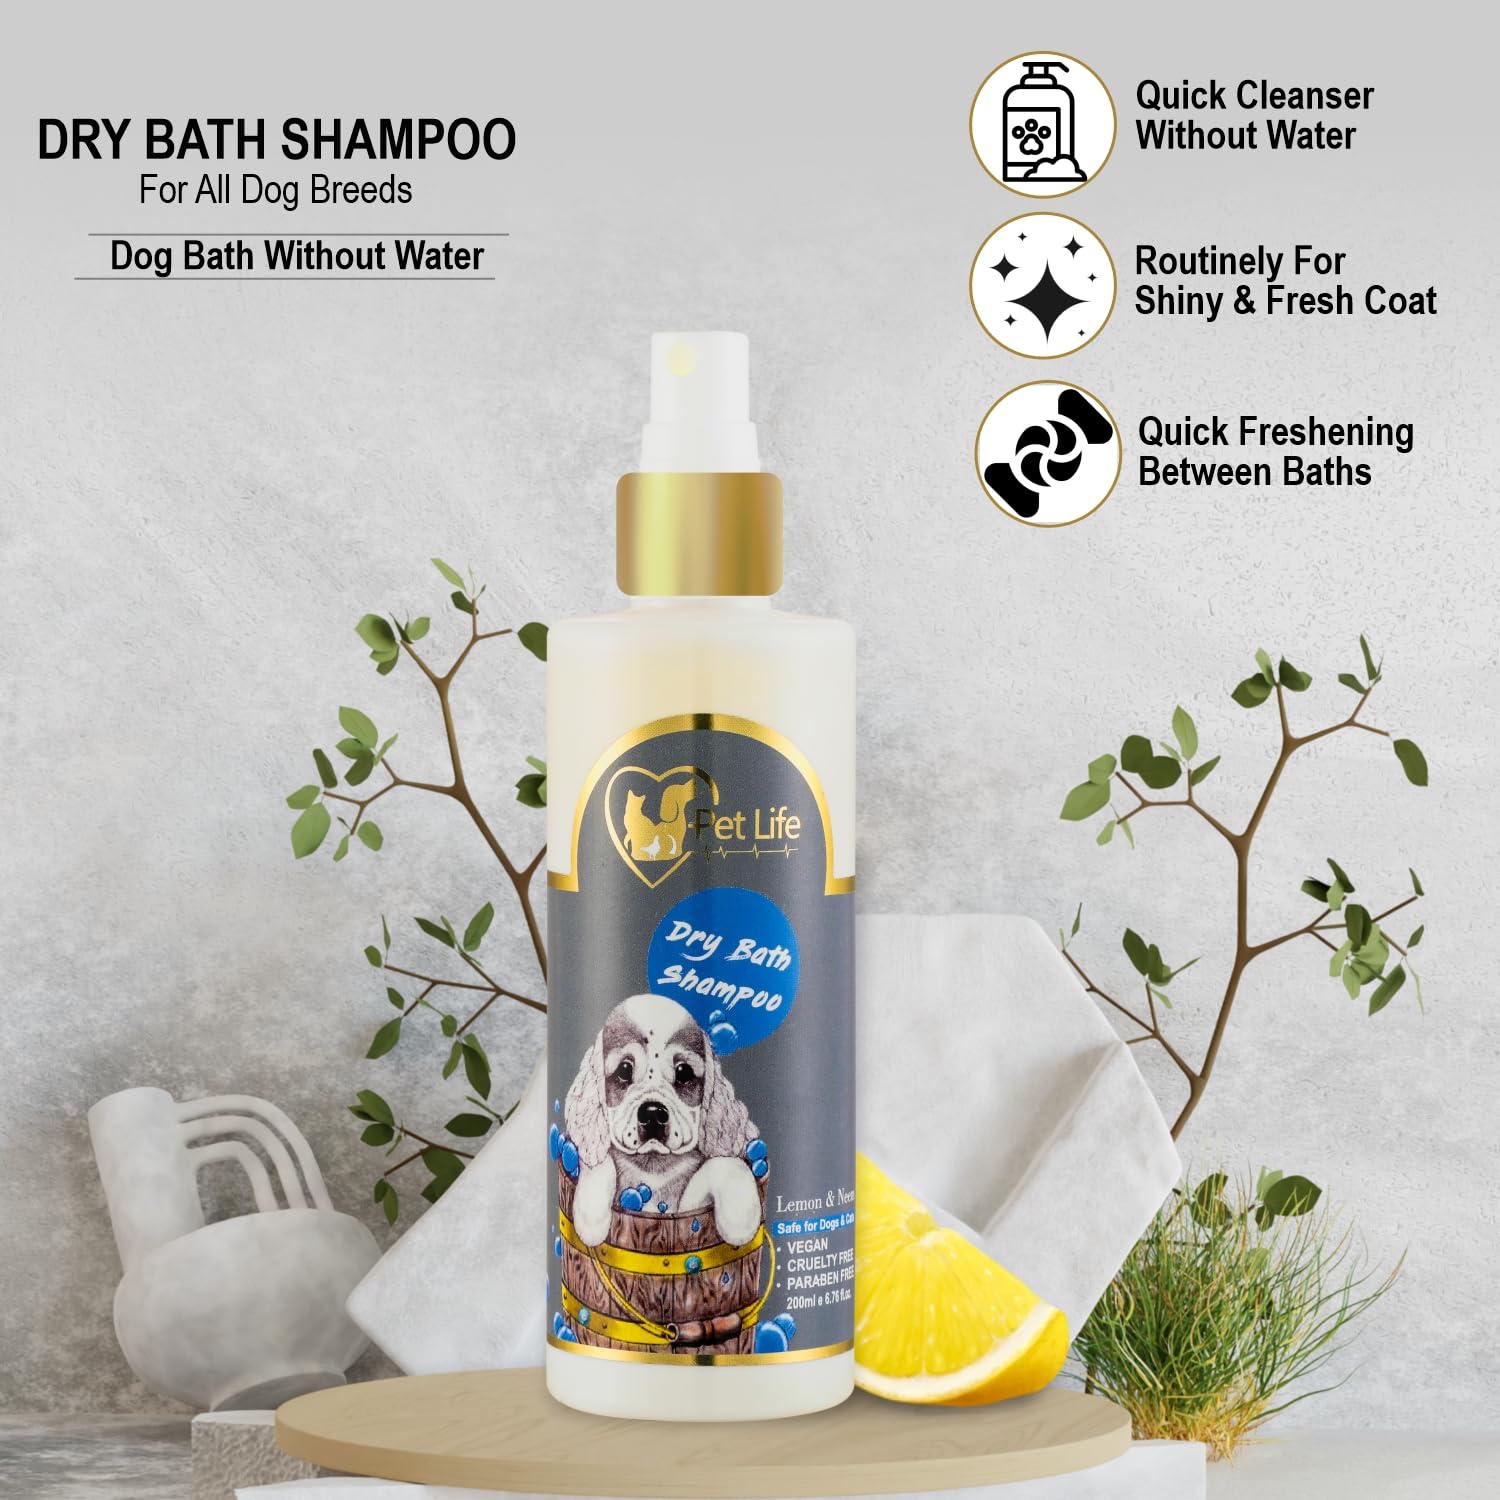 Pet Life Organic Dry Bath Shampoo for Chow Chow Dog & Puppy | Dry Waterless Spray Dog Shampoo for A Cleaner, Smoother & Shinier Coat - Made with Natural Actives | for All Dog Breed - 200 Ml